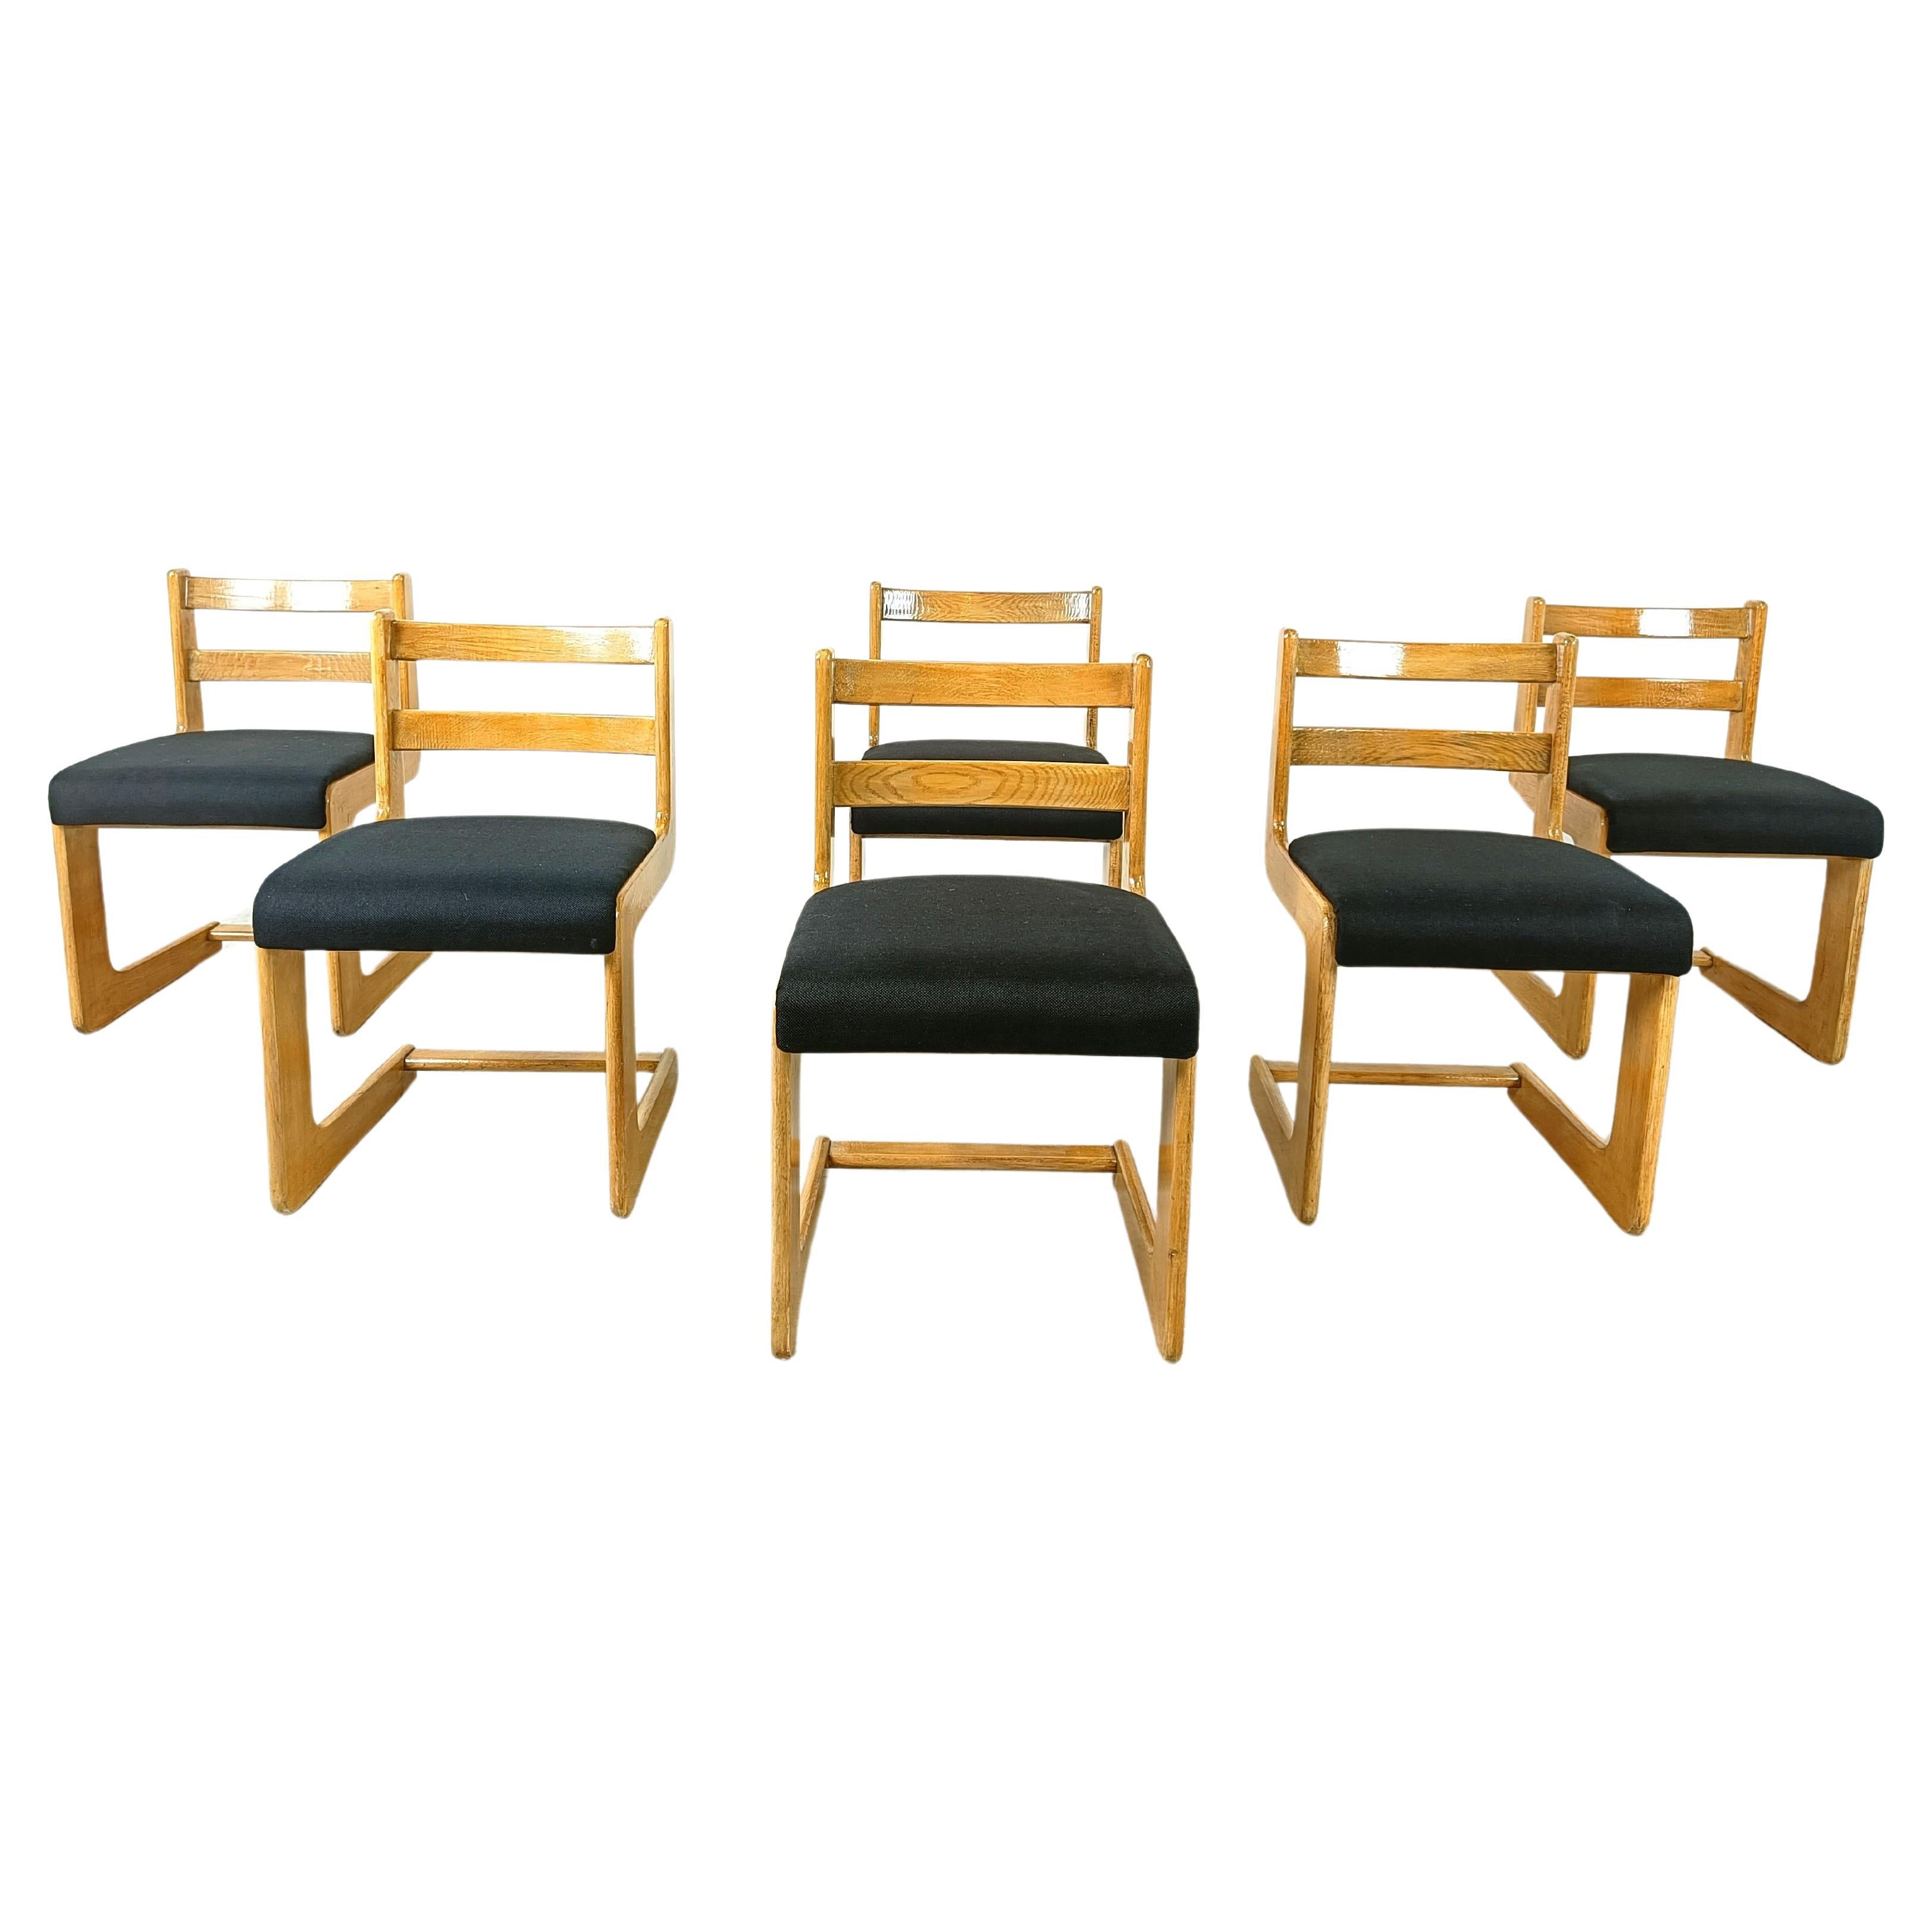 Vintage cantilever chairs by Casala, 1970s For Sale